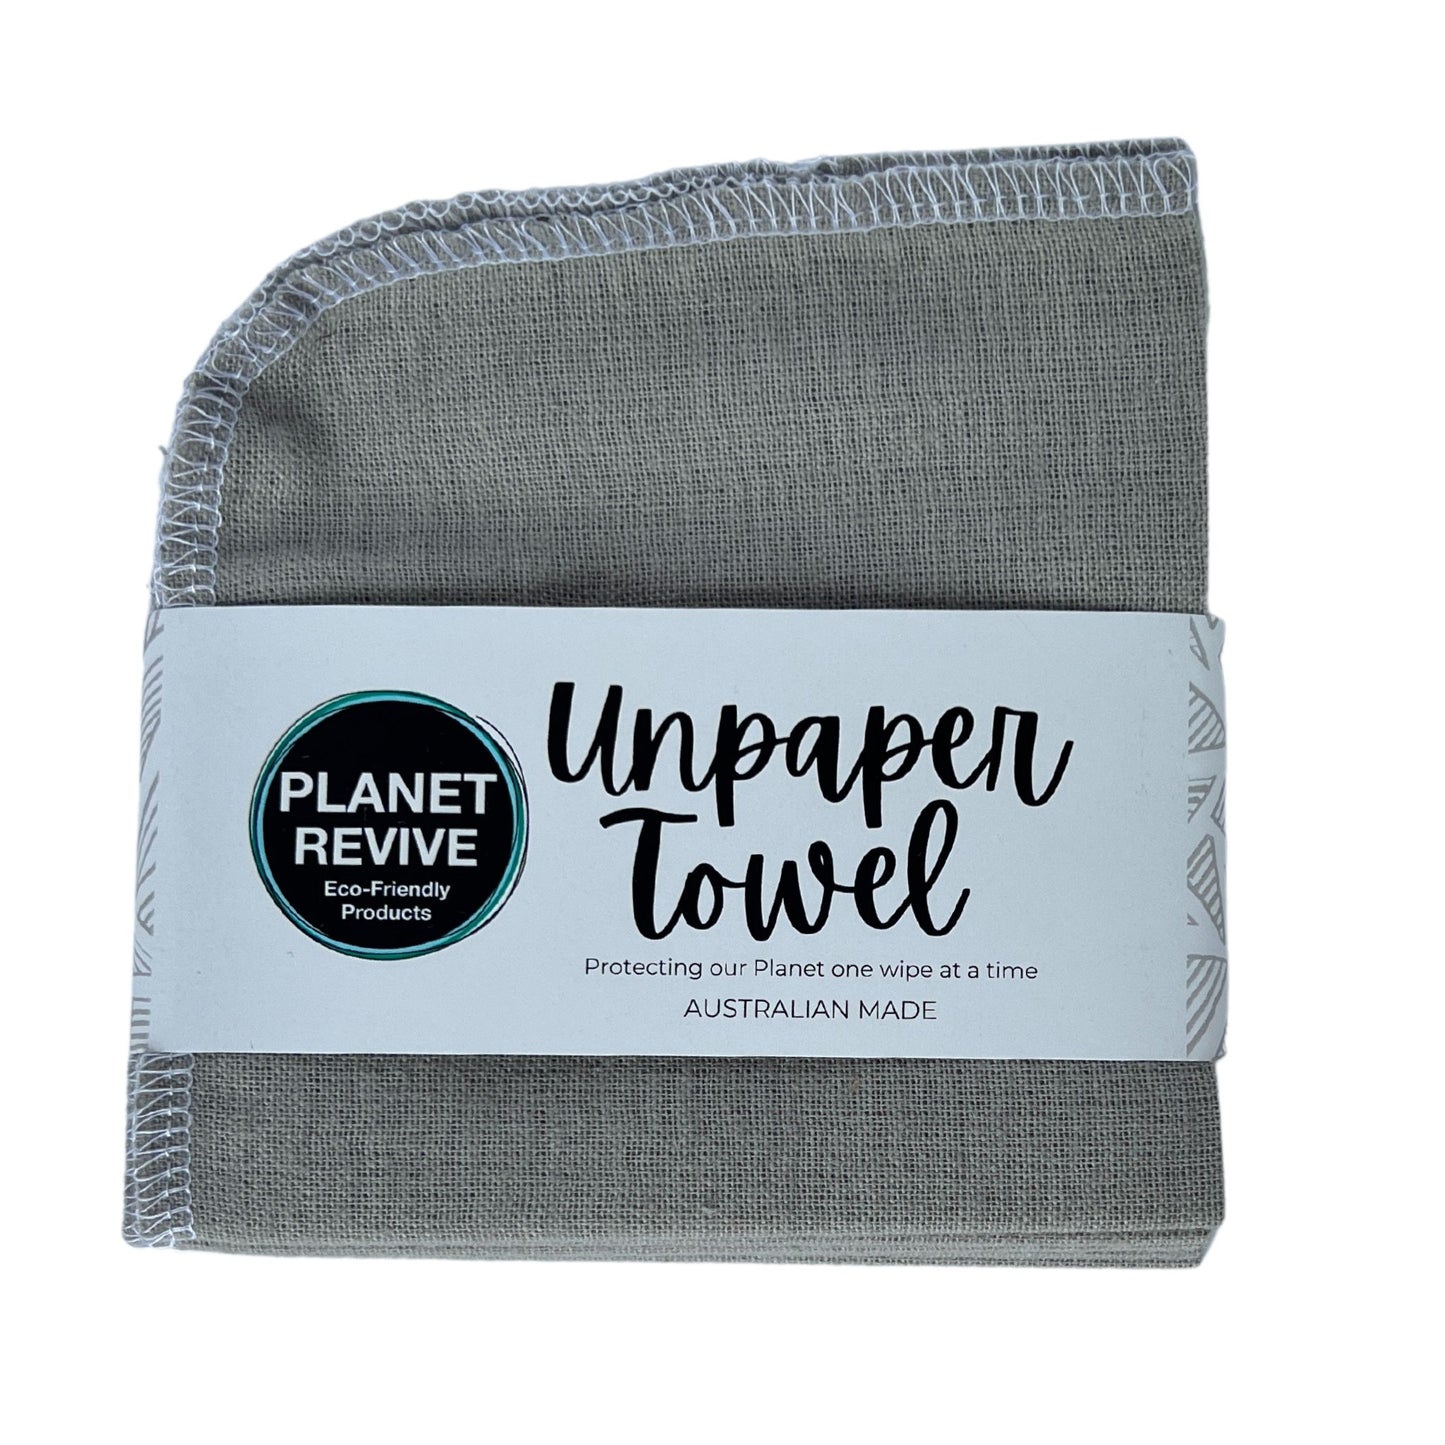 Planet Revive unpaper towels reusable kitchen wipes, pack of 6. Grey flannel